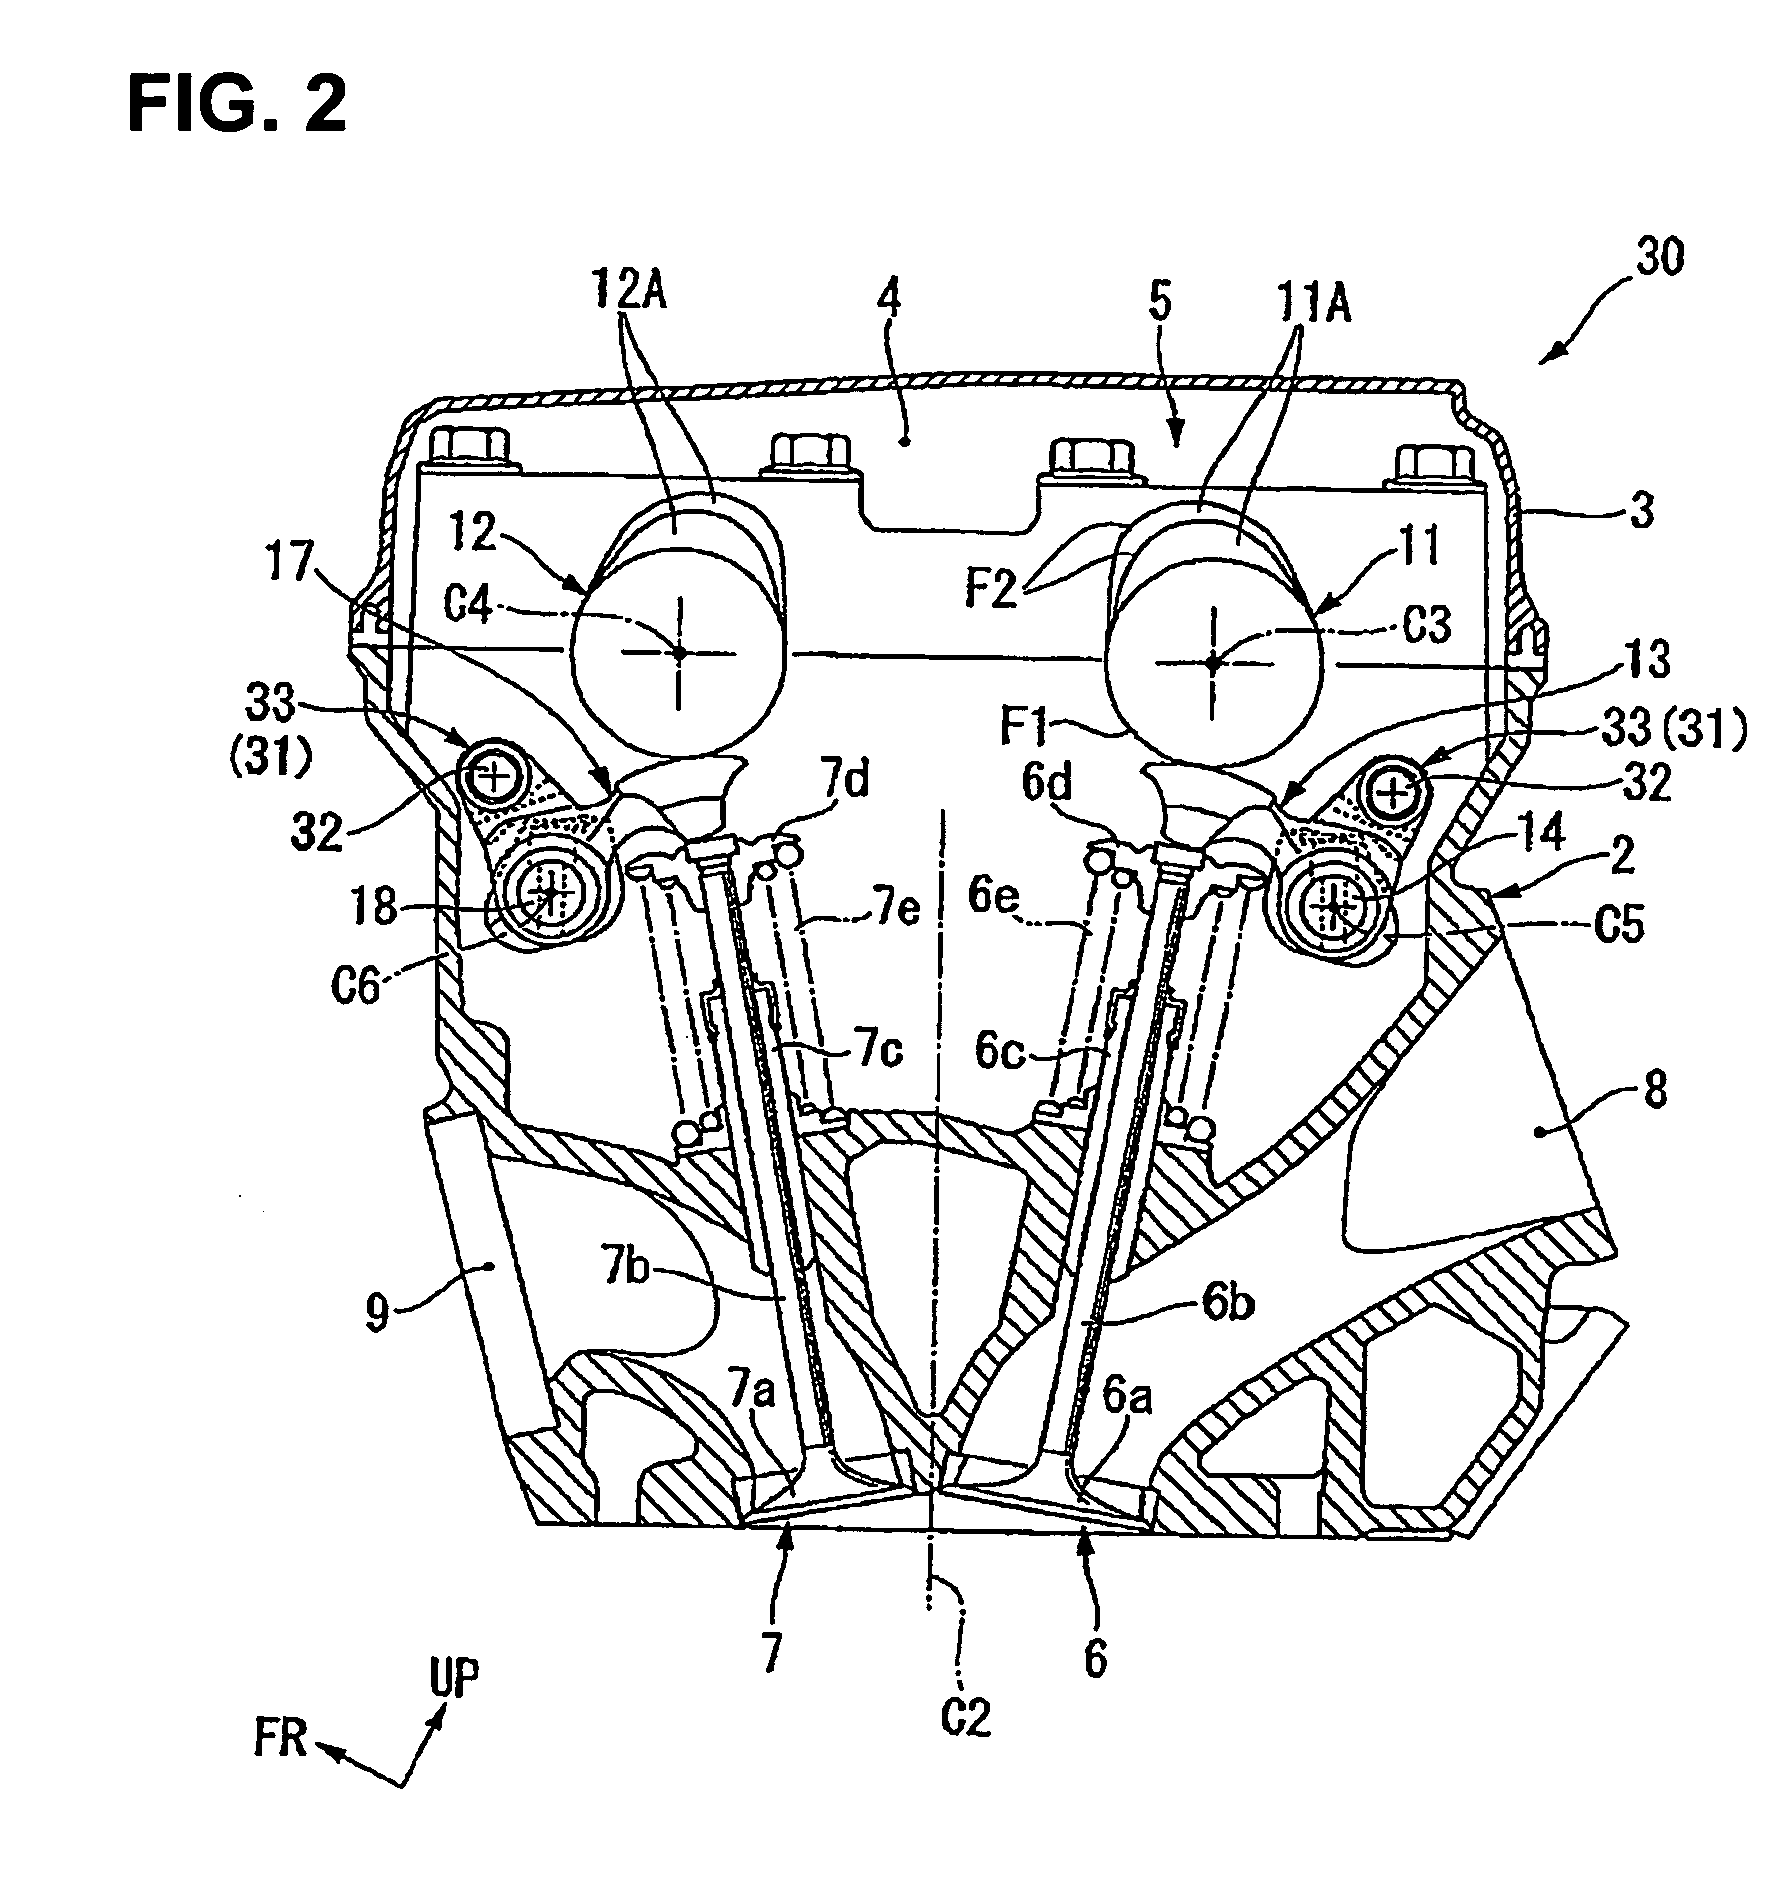 Internal combustion engine with variable valve control system